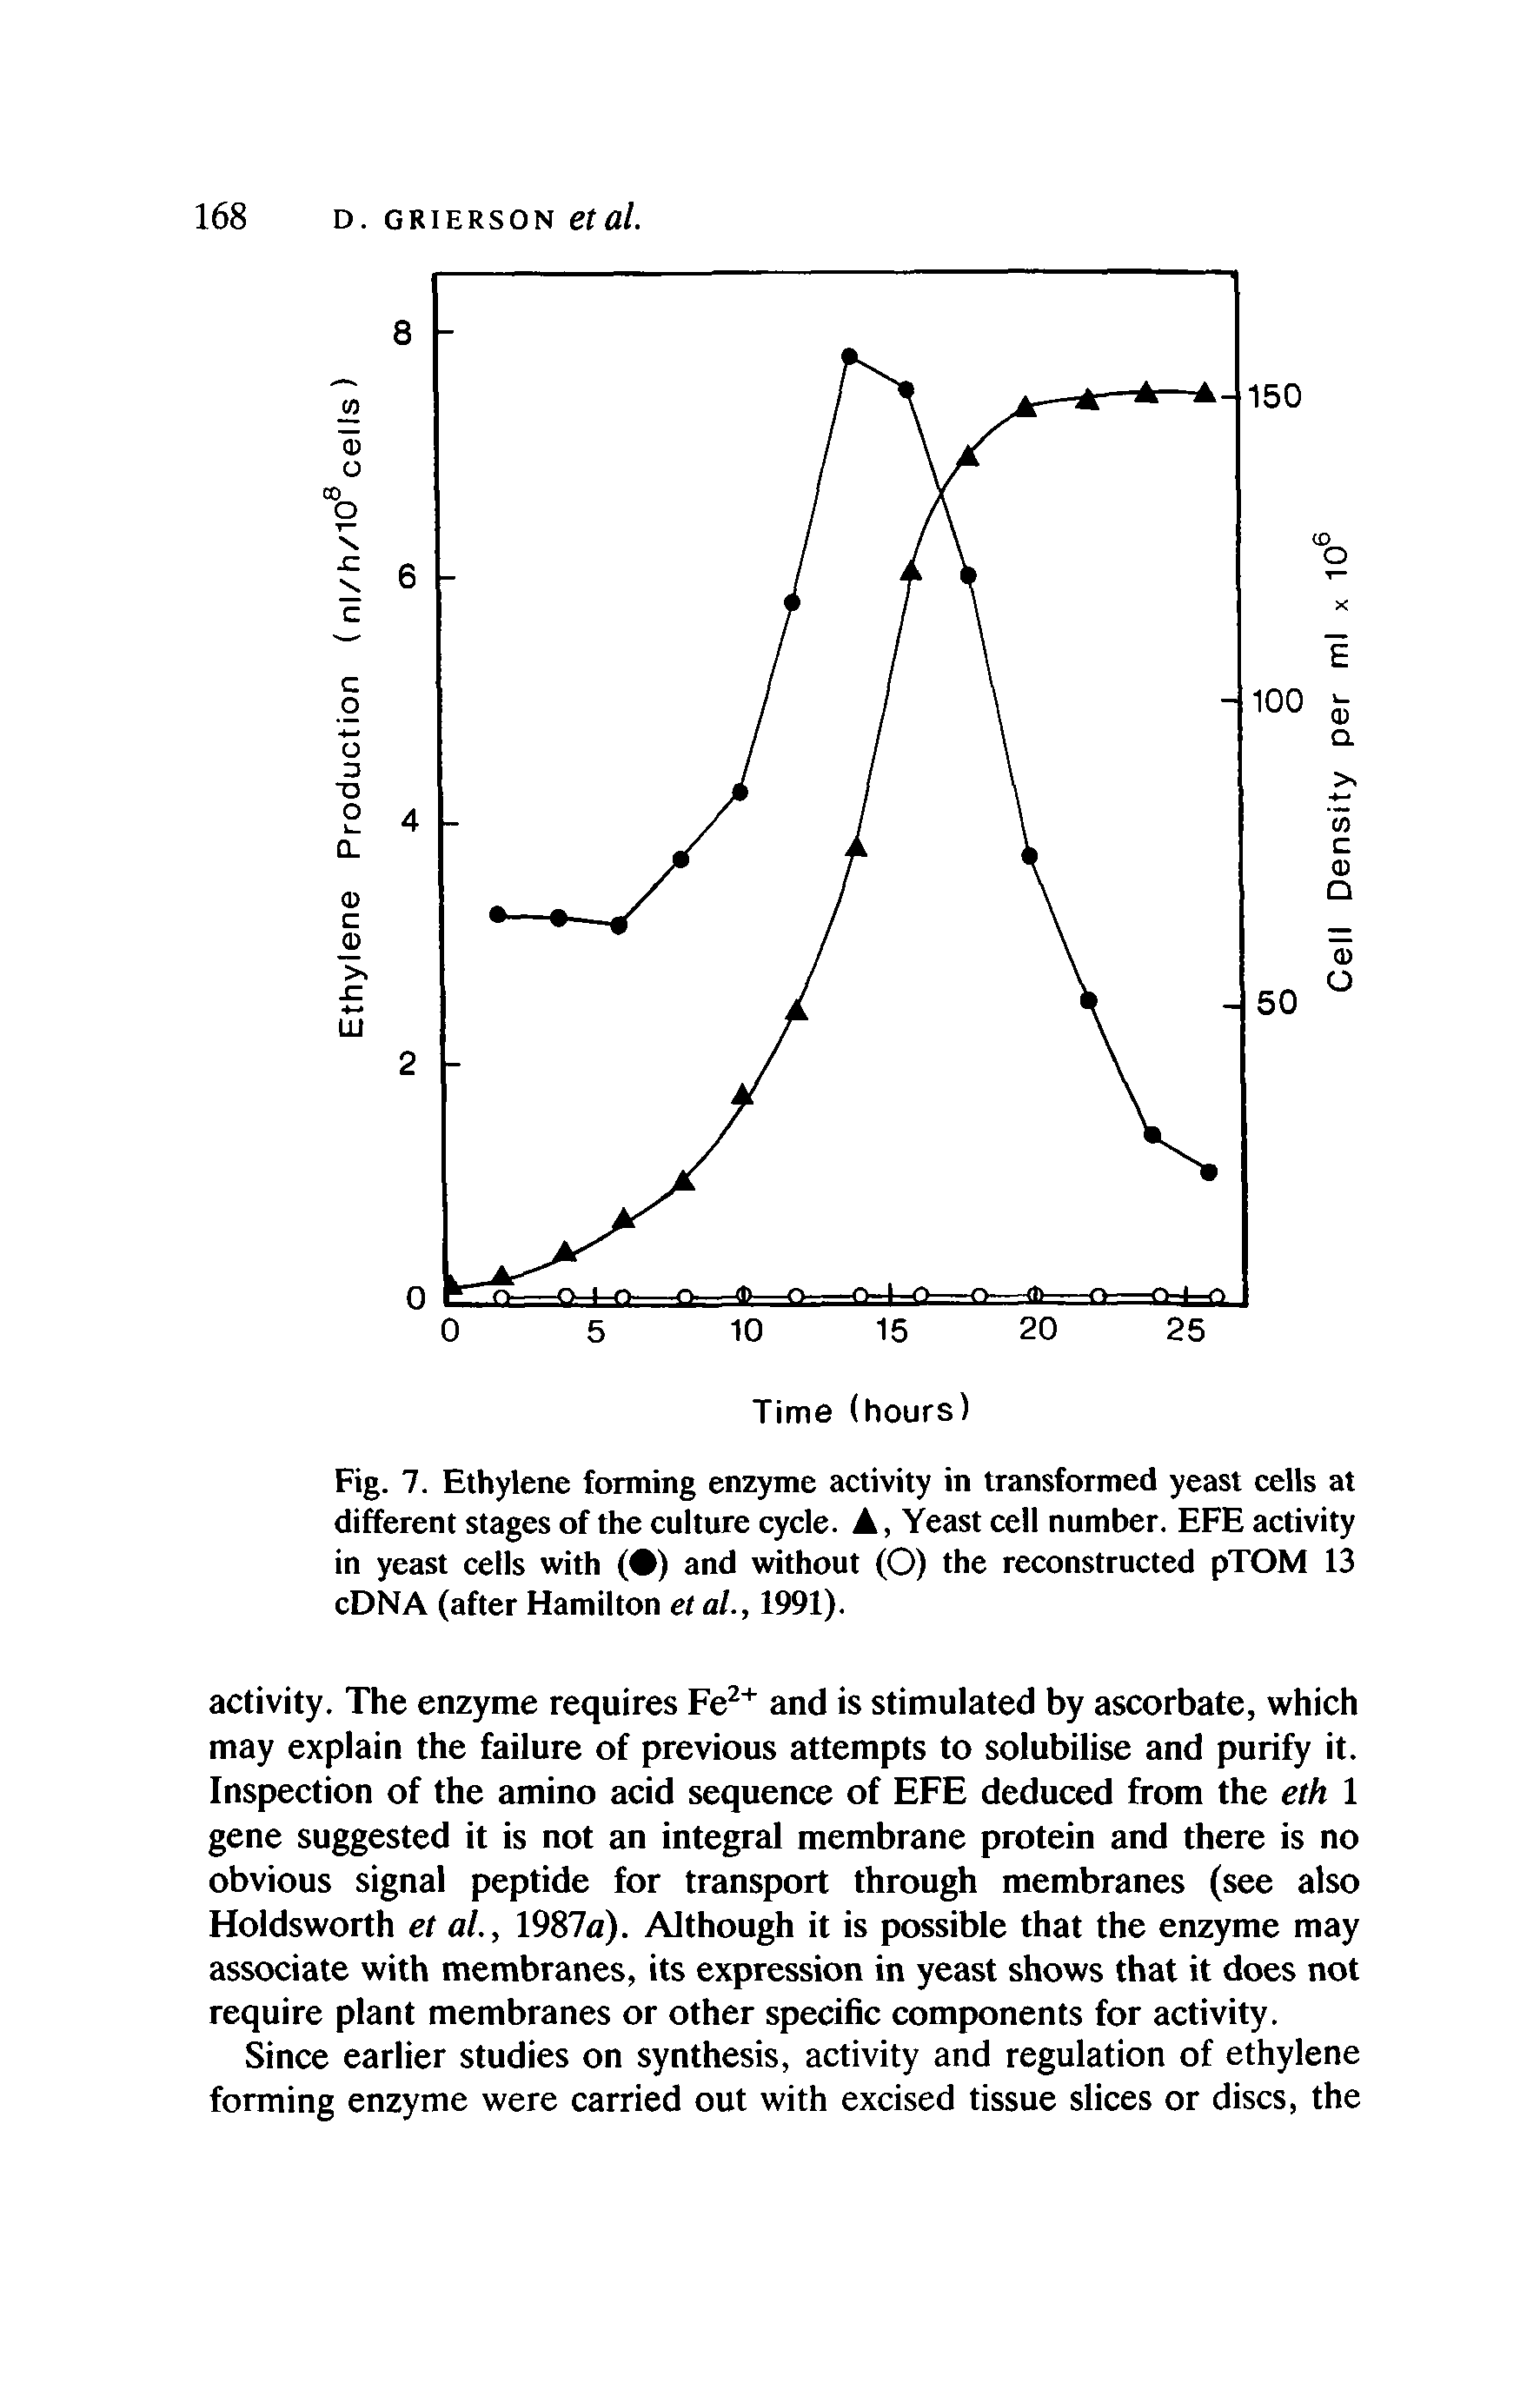 Fig. 7. Ethylene forming enzyme activity in transformed yeast cells at different stages of the culture cycle. A, Yeast cell number. EFE activity in yeast cells with ( ) and without (O) the reconstructed pTOM 13 cDNA (after Hamilton et al., 1991).